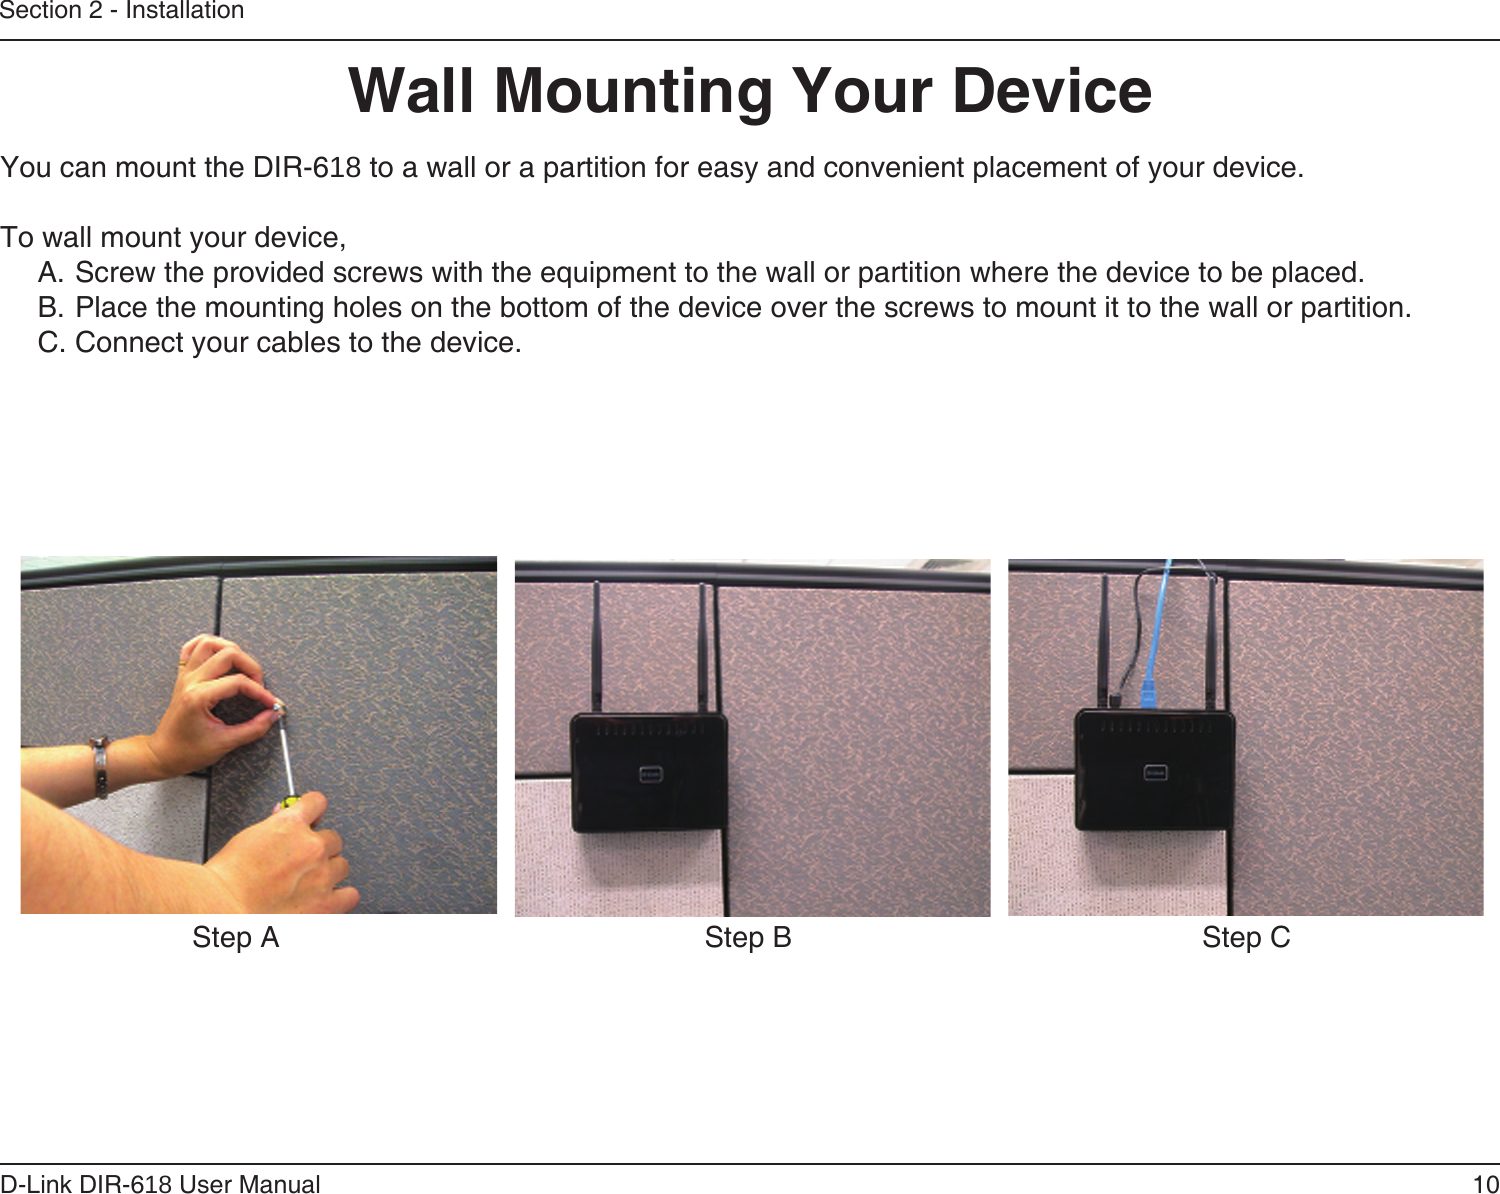 10D-Link DIR-618 User ManualSection 2 - InstallationWall Mounting Your DeviceYou can mount the DIR-618 to a wall or a partition for easy and convenient placement of your device.To wall mount your device,A. Screw the provided screws with the equipment to the wall or partition where the device to be placed.B. Place the mounting holes on the bottom of the device over the screws to mount it to the wall or partition.C. Connect your cables to the device.Step A Step B Step C